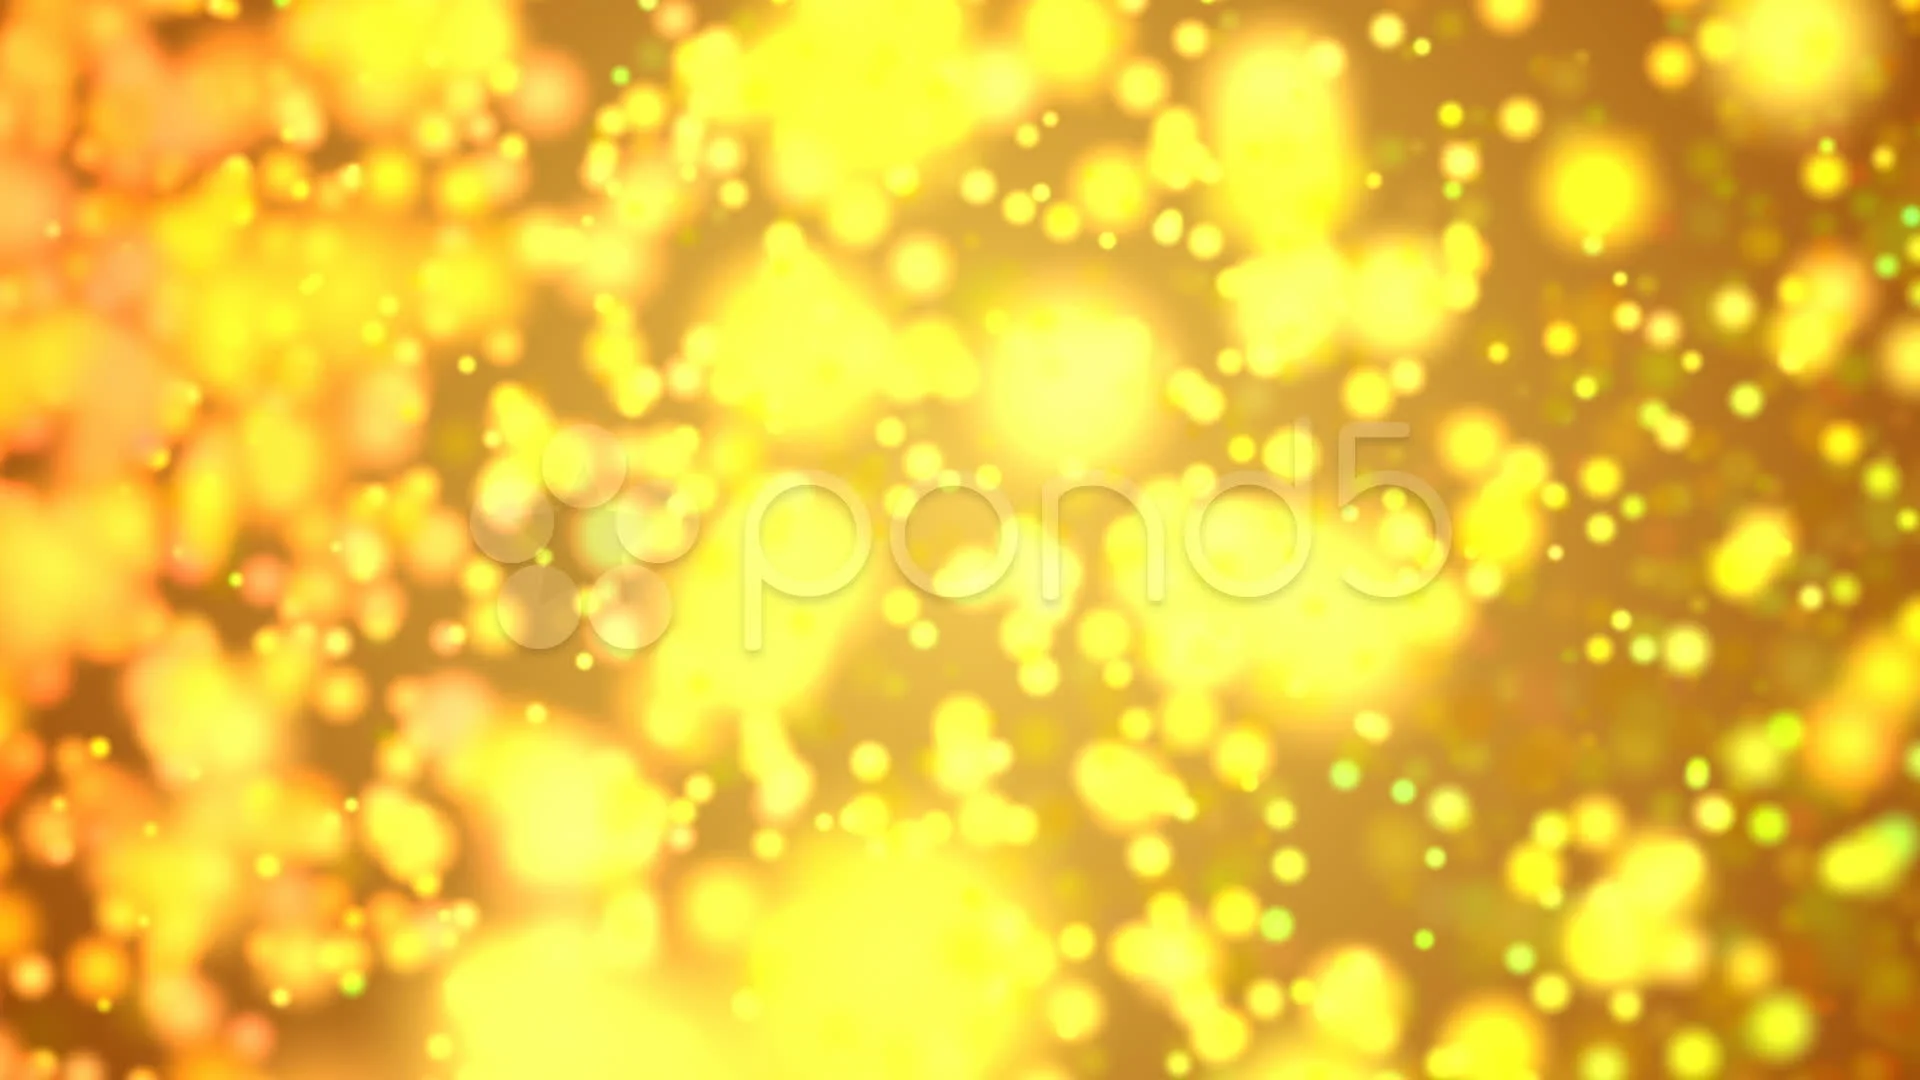 Glowing yellow particles background | Stock Video | Pond5